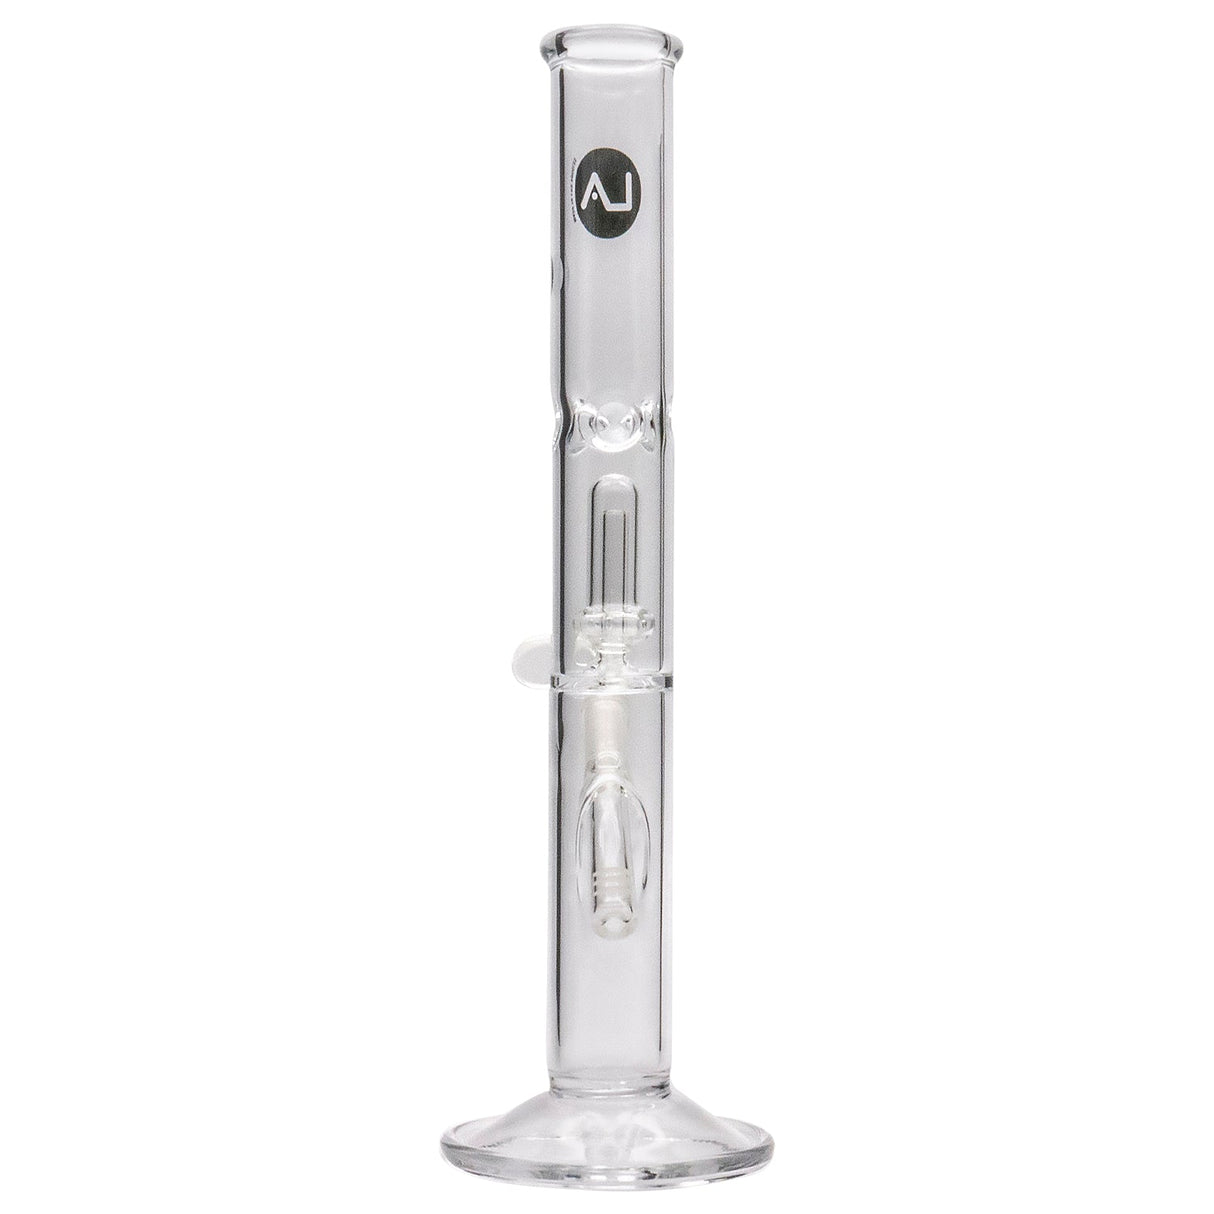 LA Pipes Straight Bong with Single Showerhead Perc, Borosilicate Glass, Front View